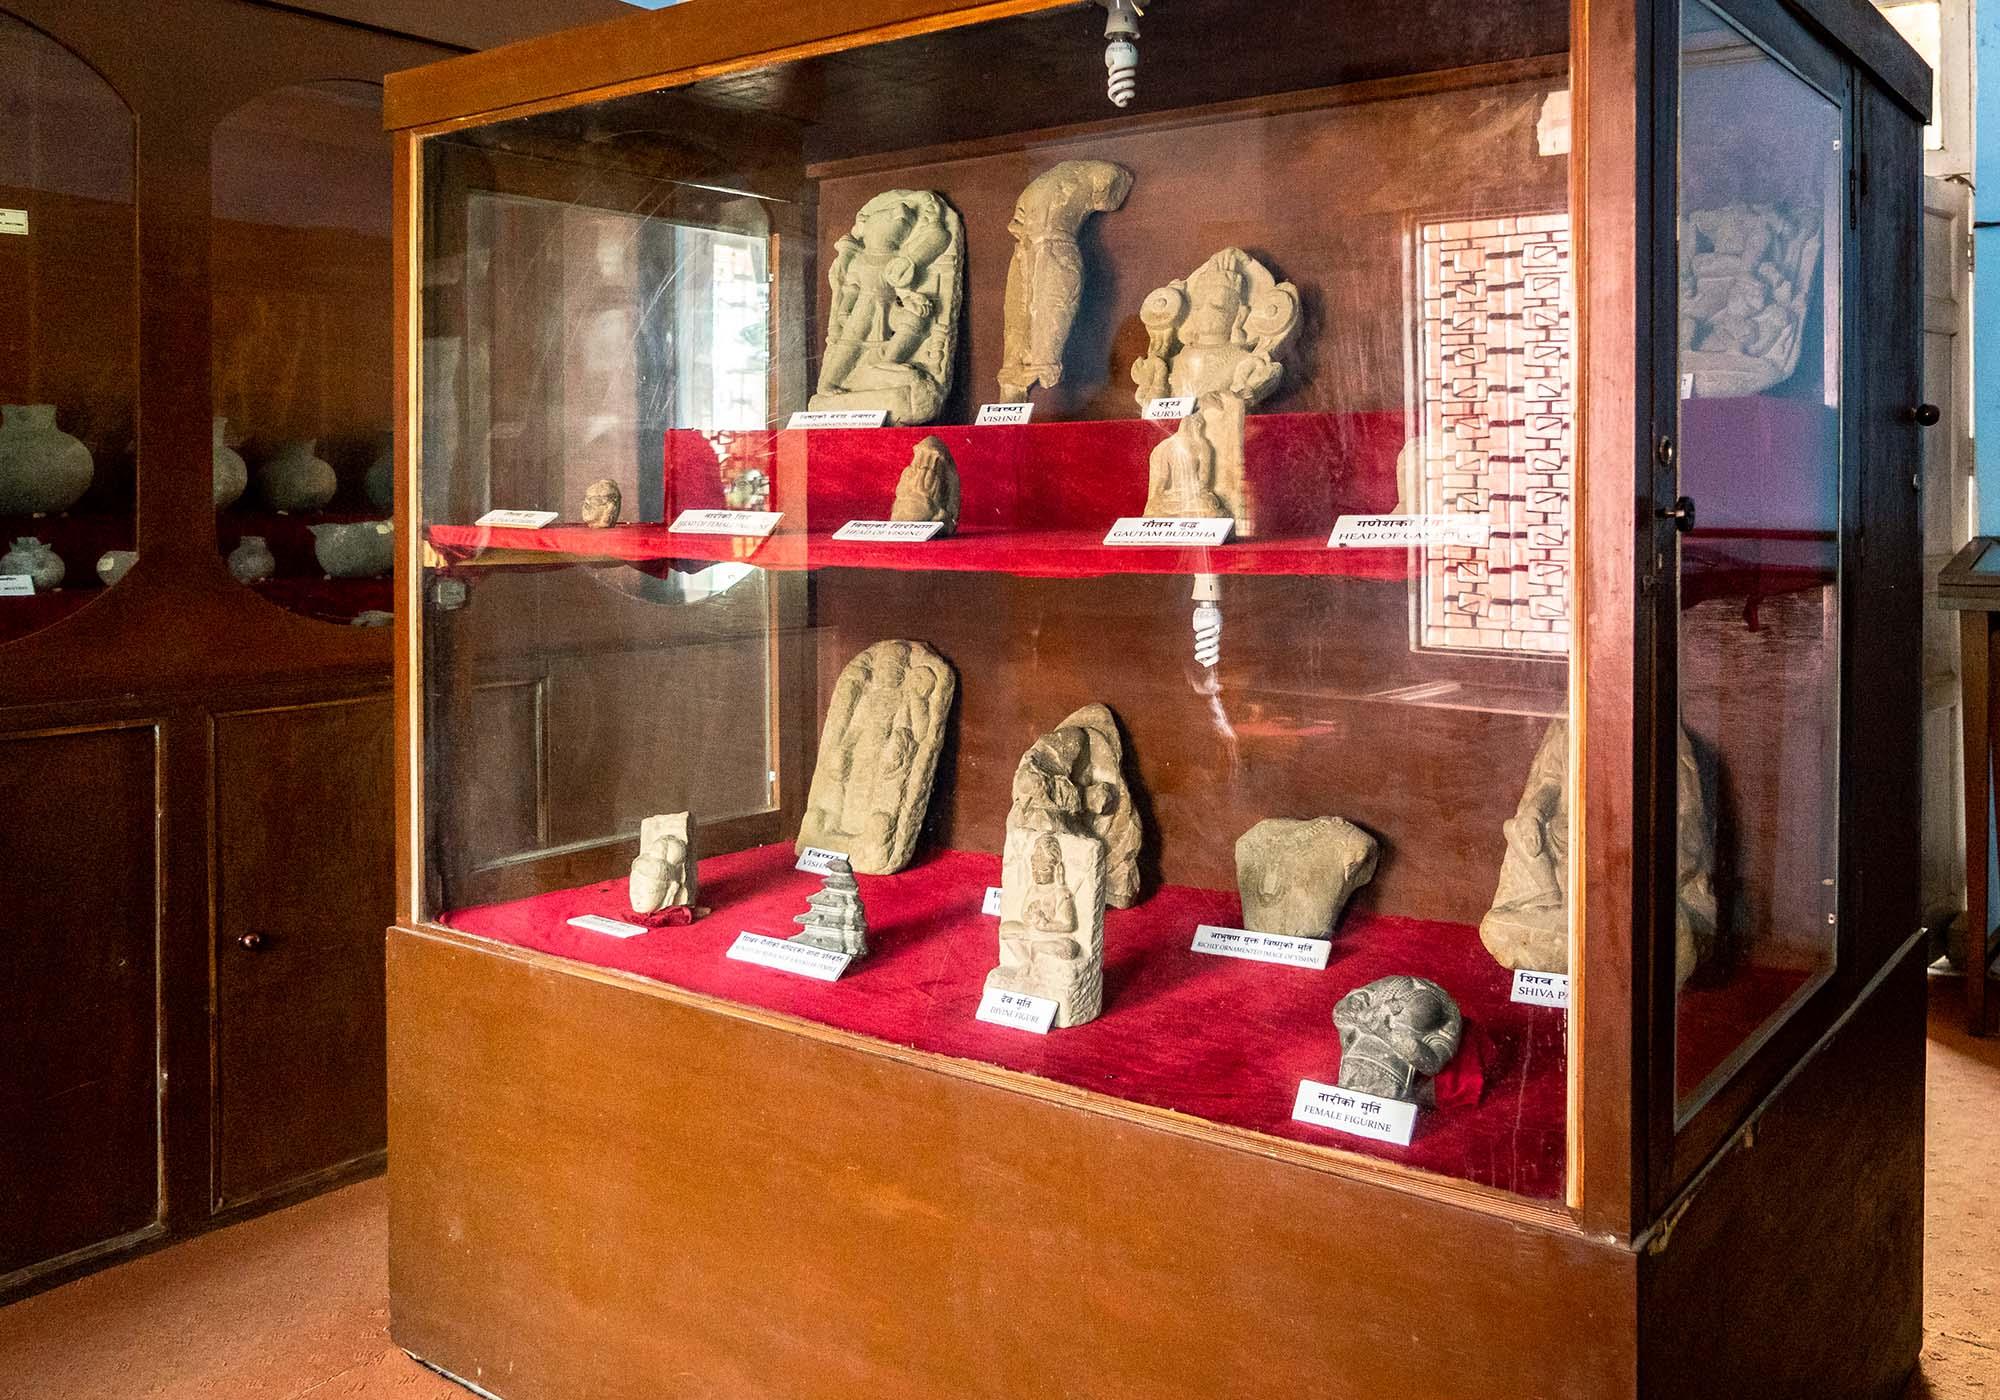 The nearby Kapilavastu Museum has an exhibition showing some of the items that have been found during the archaeological work here at Tilaurakot. A new museum is being built to house the treasures from the site. – © Michael Turtle